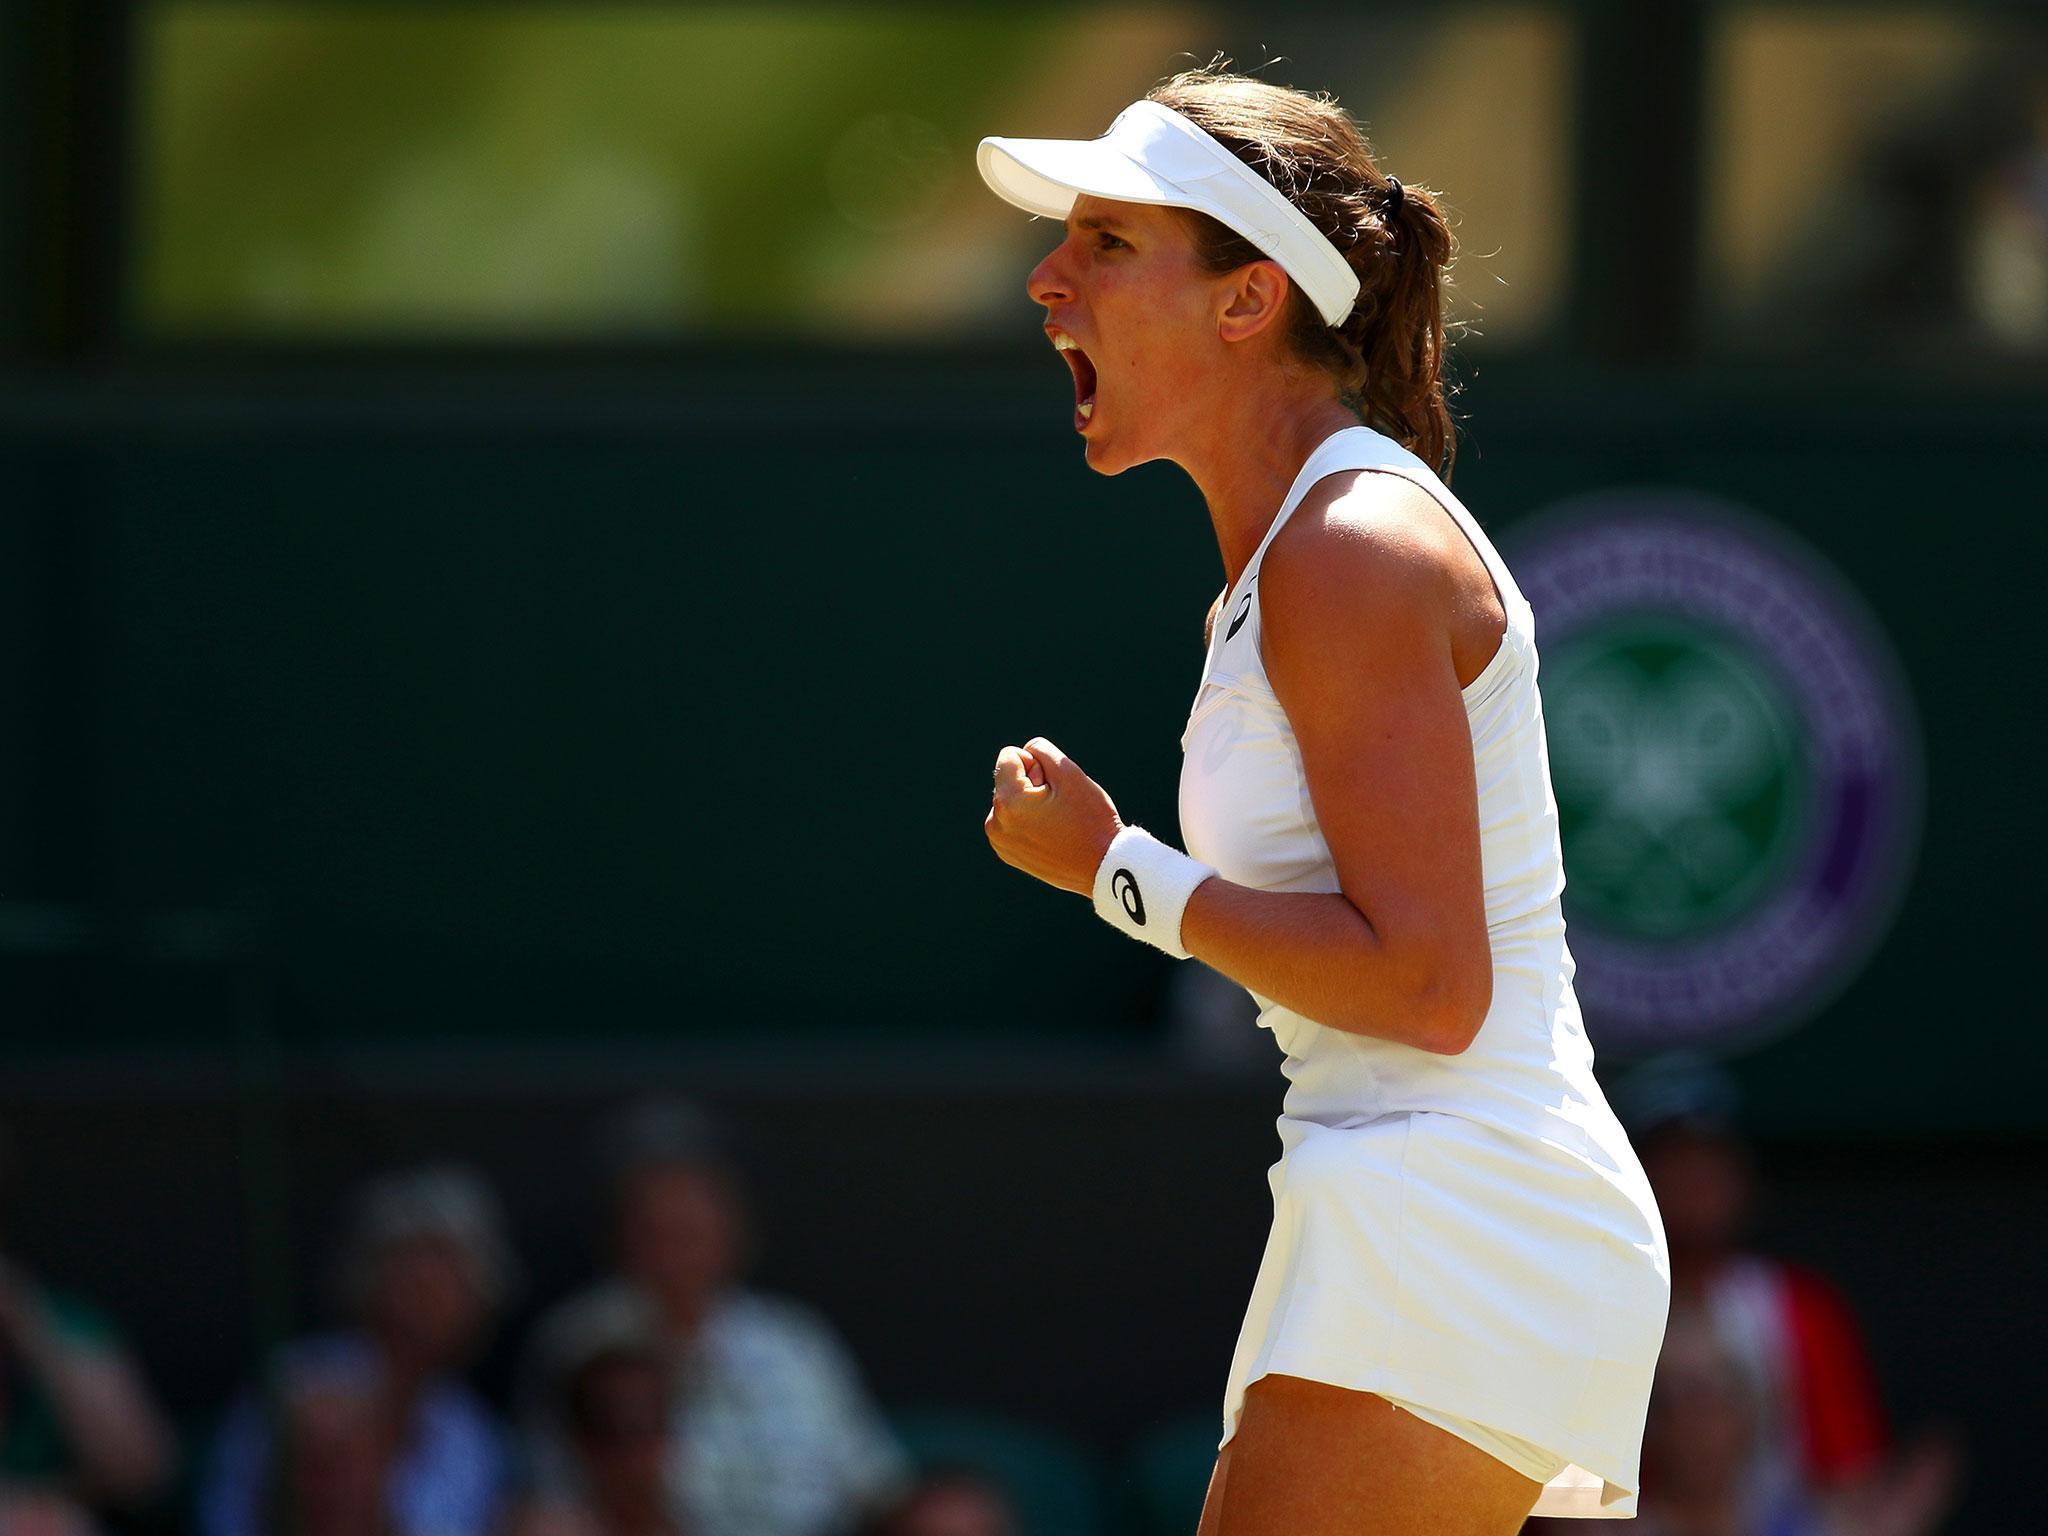 Konta is bookmakers' favourite to win Wimbledon